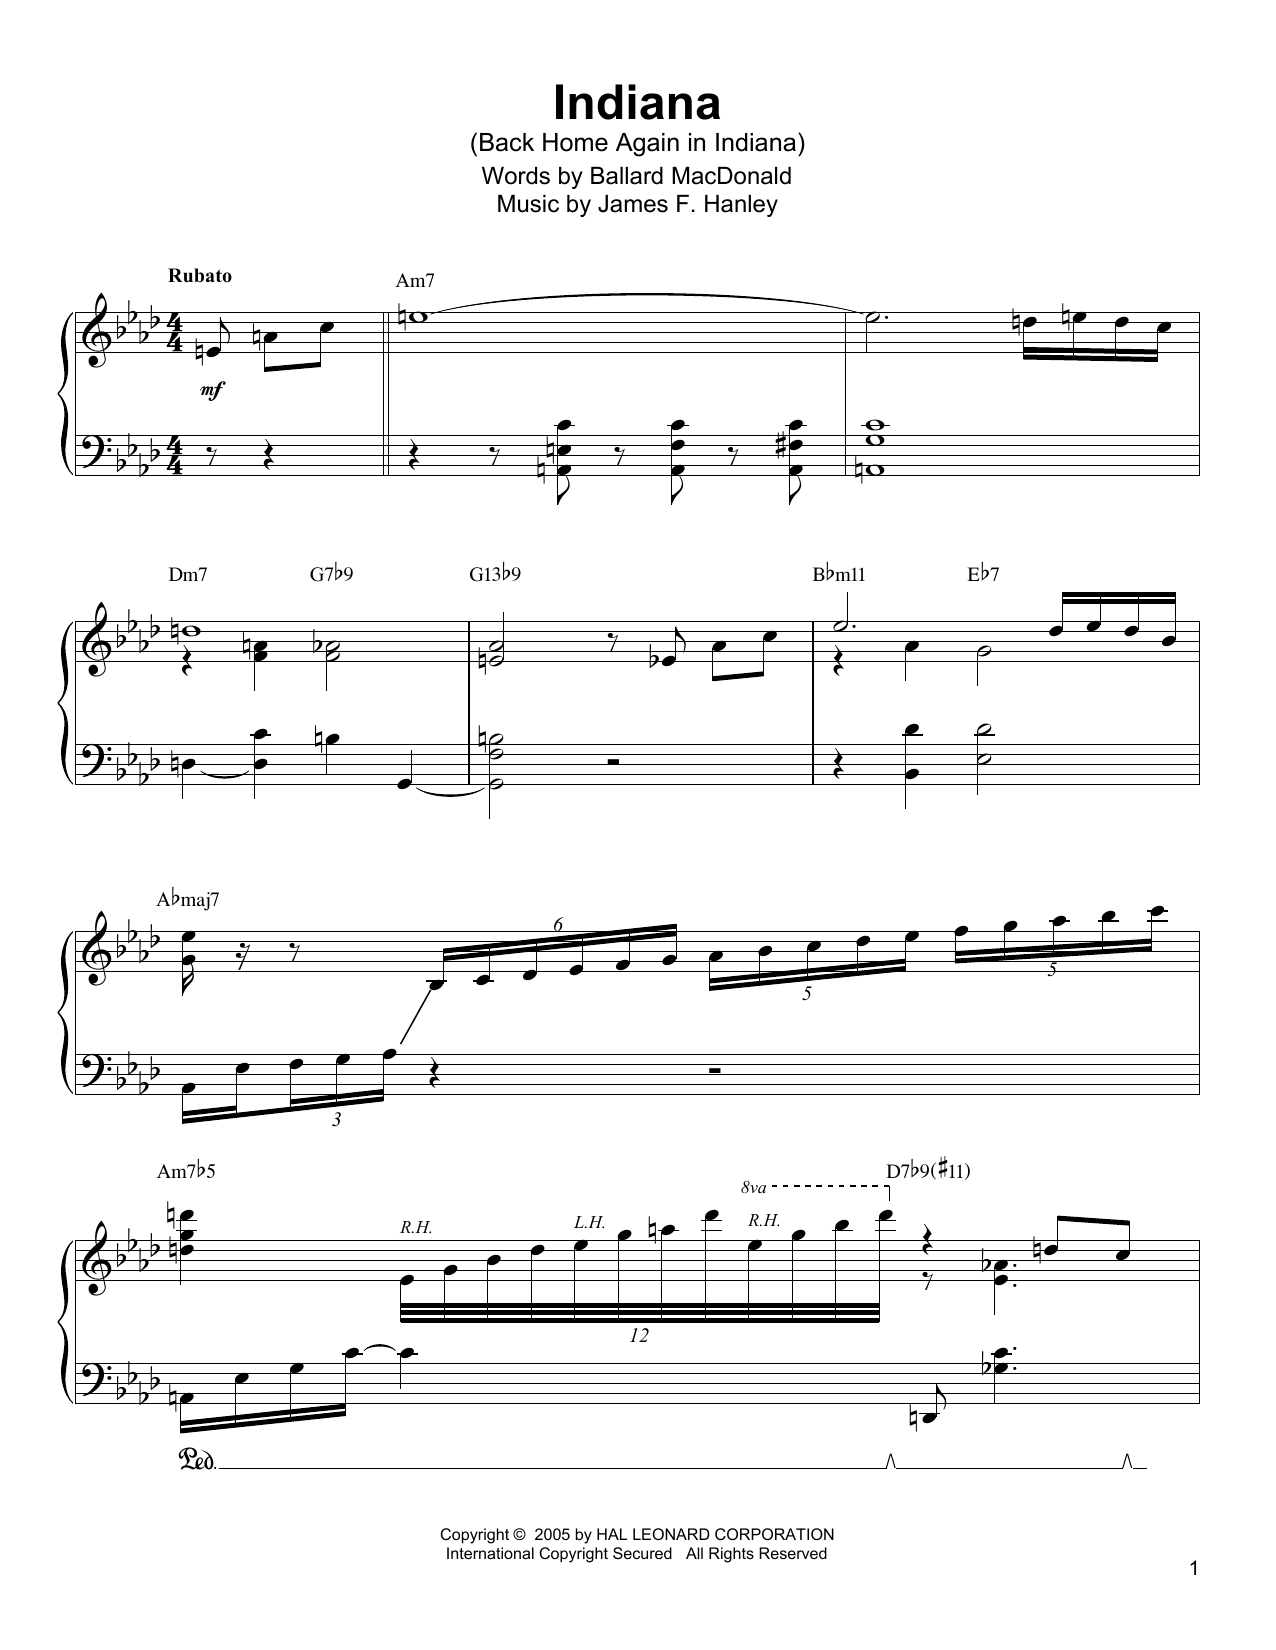 Download Oscar Peterson Indiana (Back Home Again In Indiana) Sheet Music